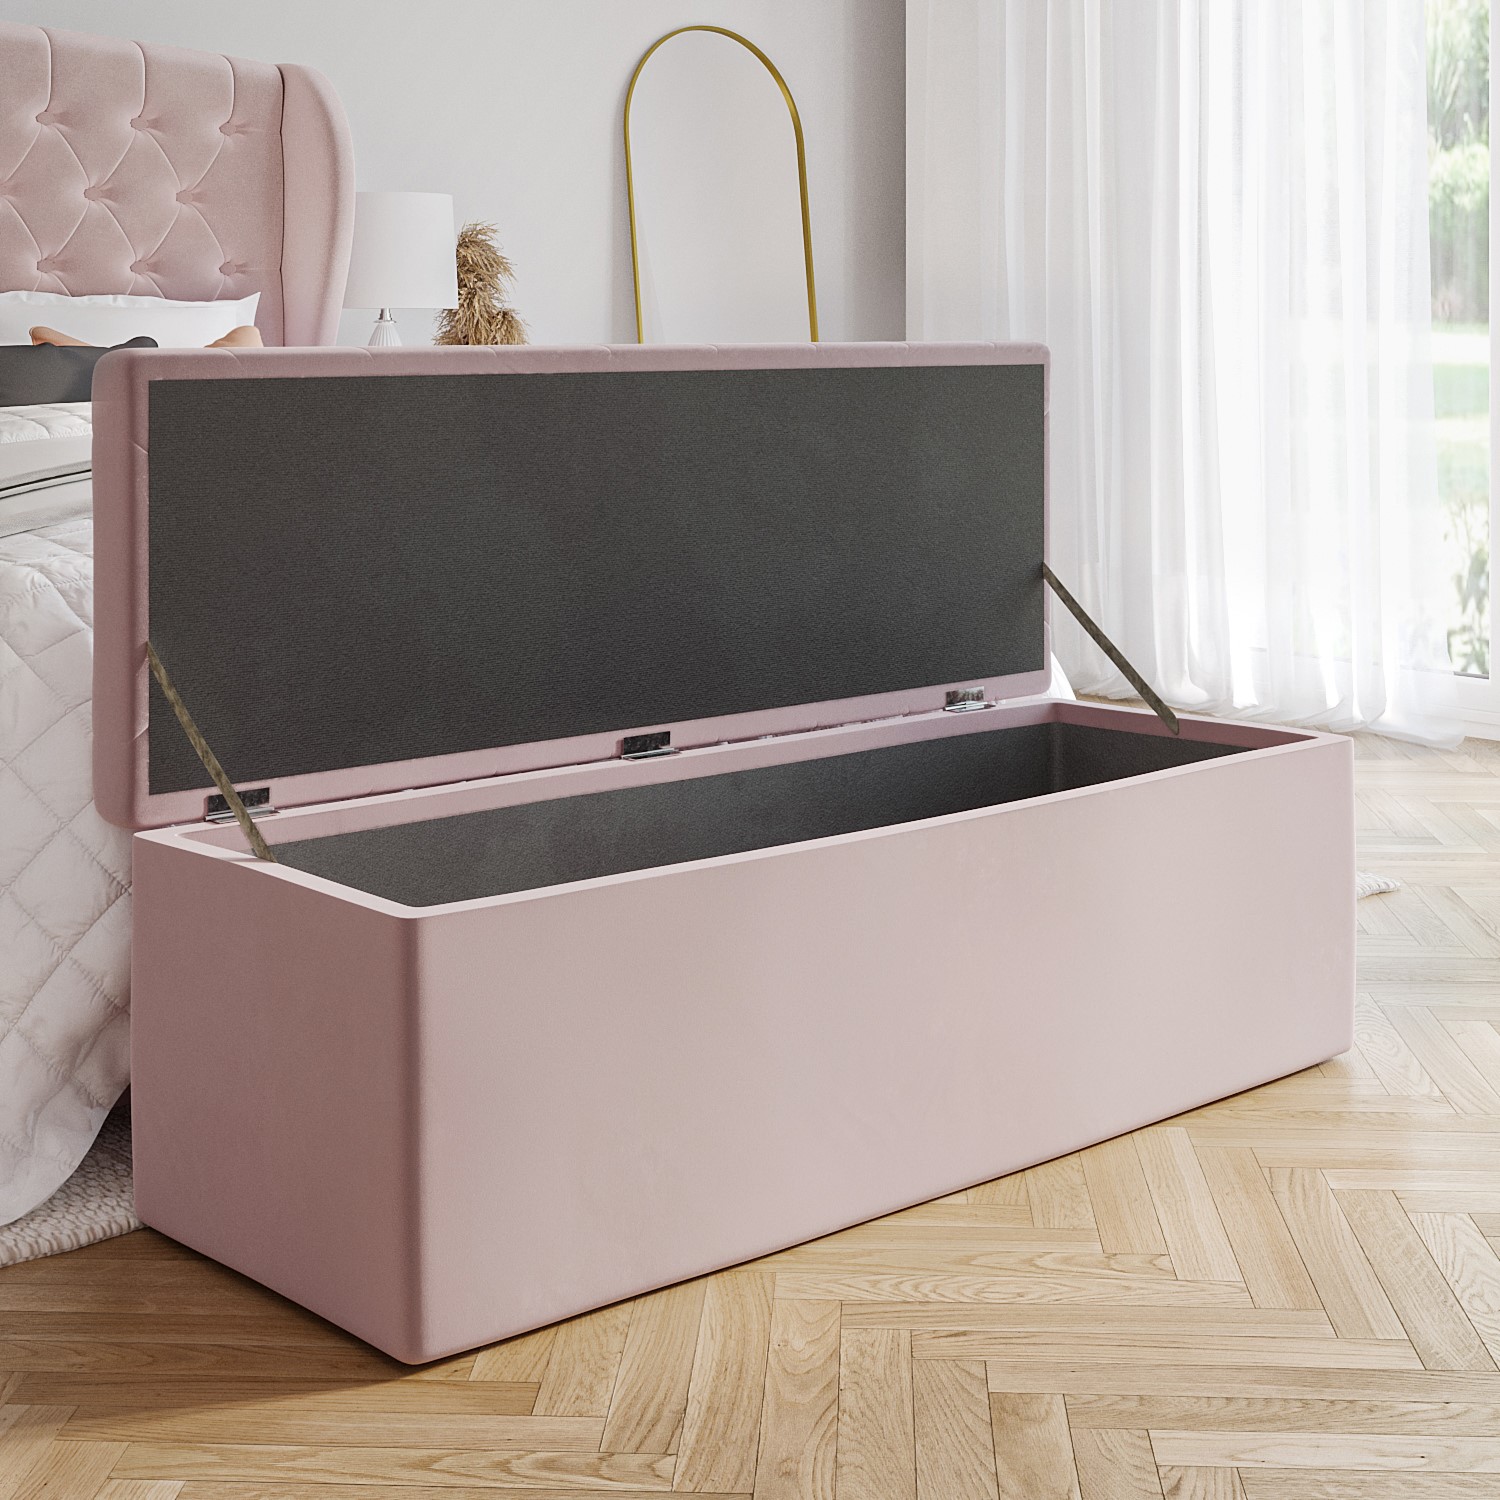 Read more about Safina ottoman storage box in pink velvet